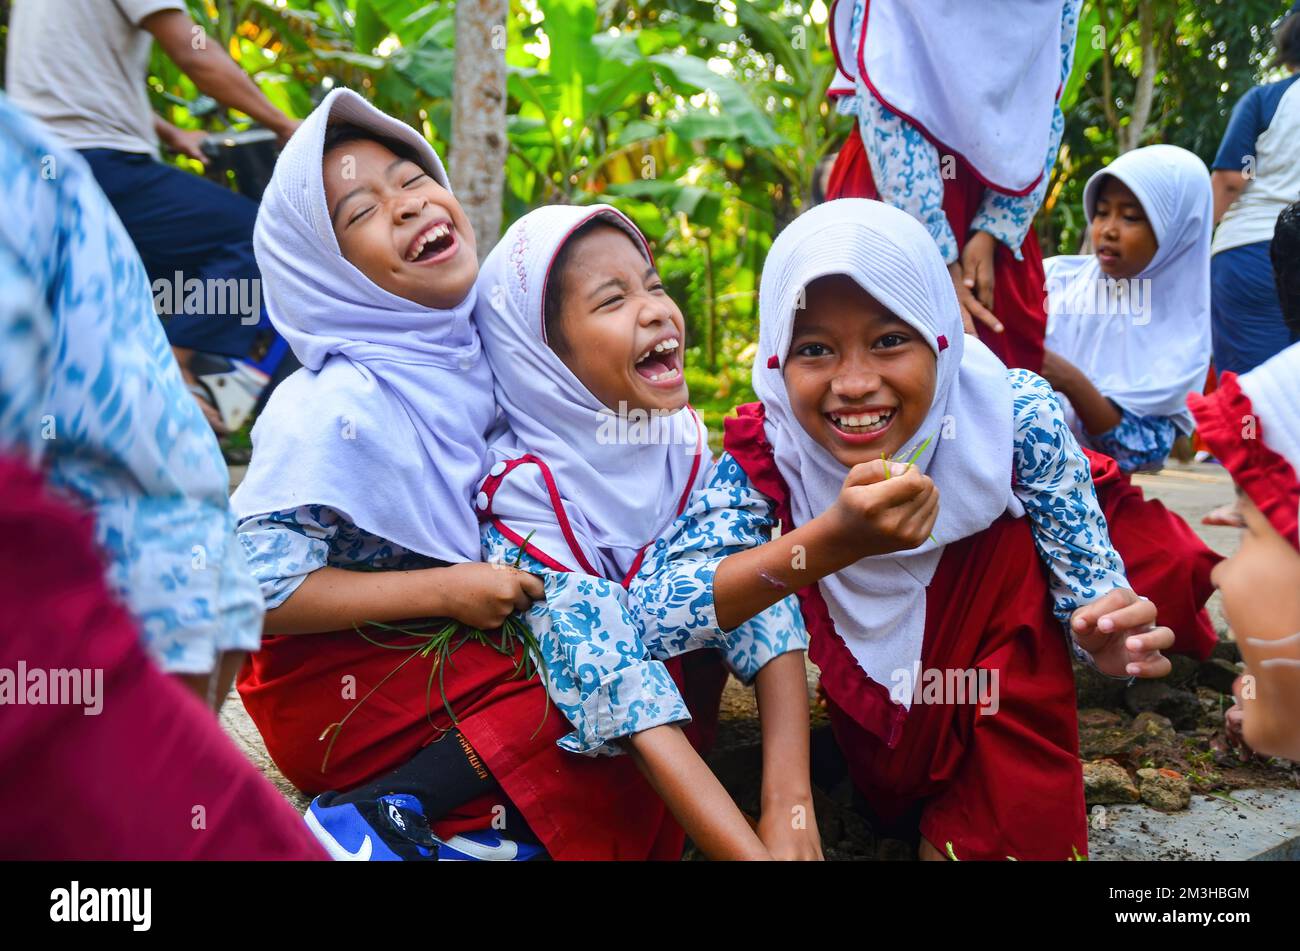 Sukamanah Village, Jambe District, Banten, Indonesia - 12 aprile 2018: Happy Energetic School Kids Playing in Front of their School SDN Sukamanah Foto Stock